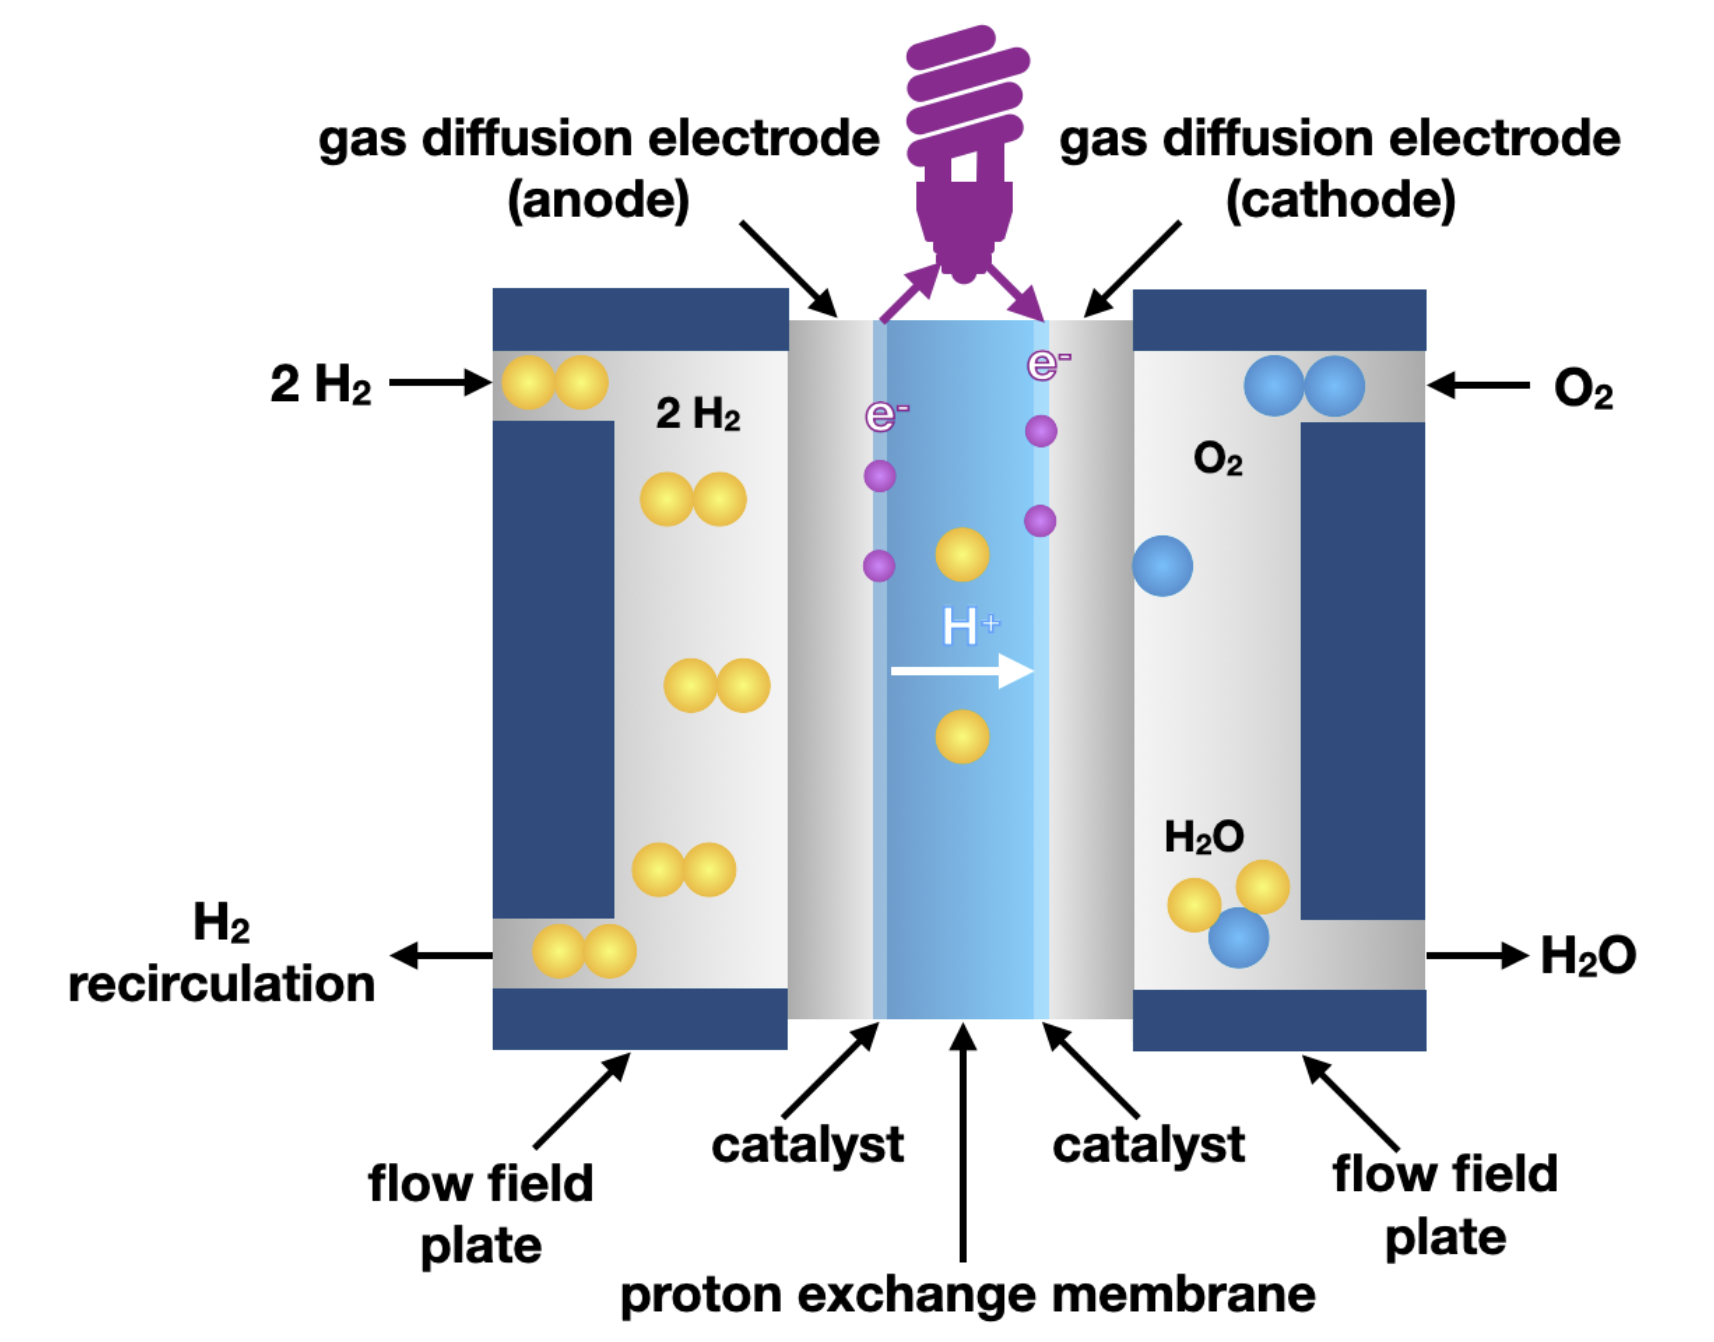 Basic Schematic of a PEM Fuel Cell